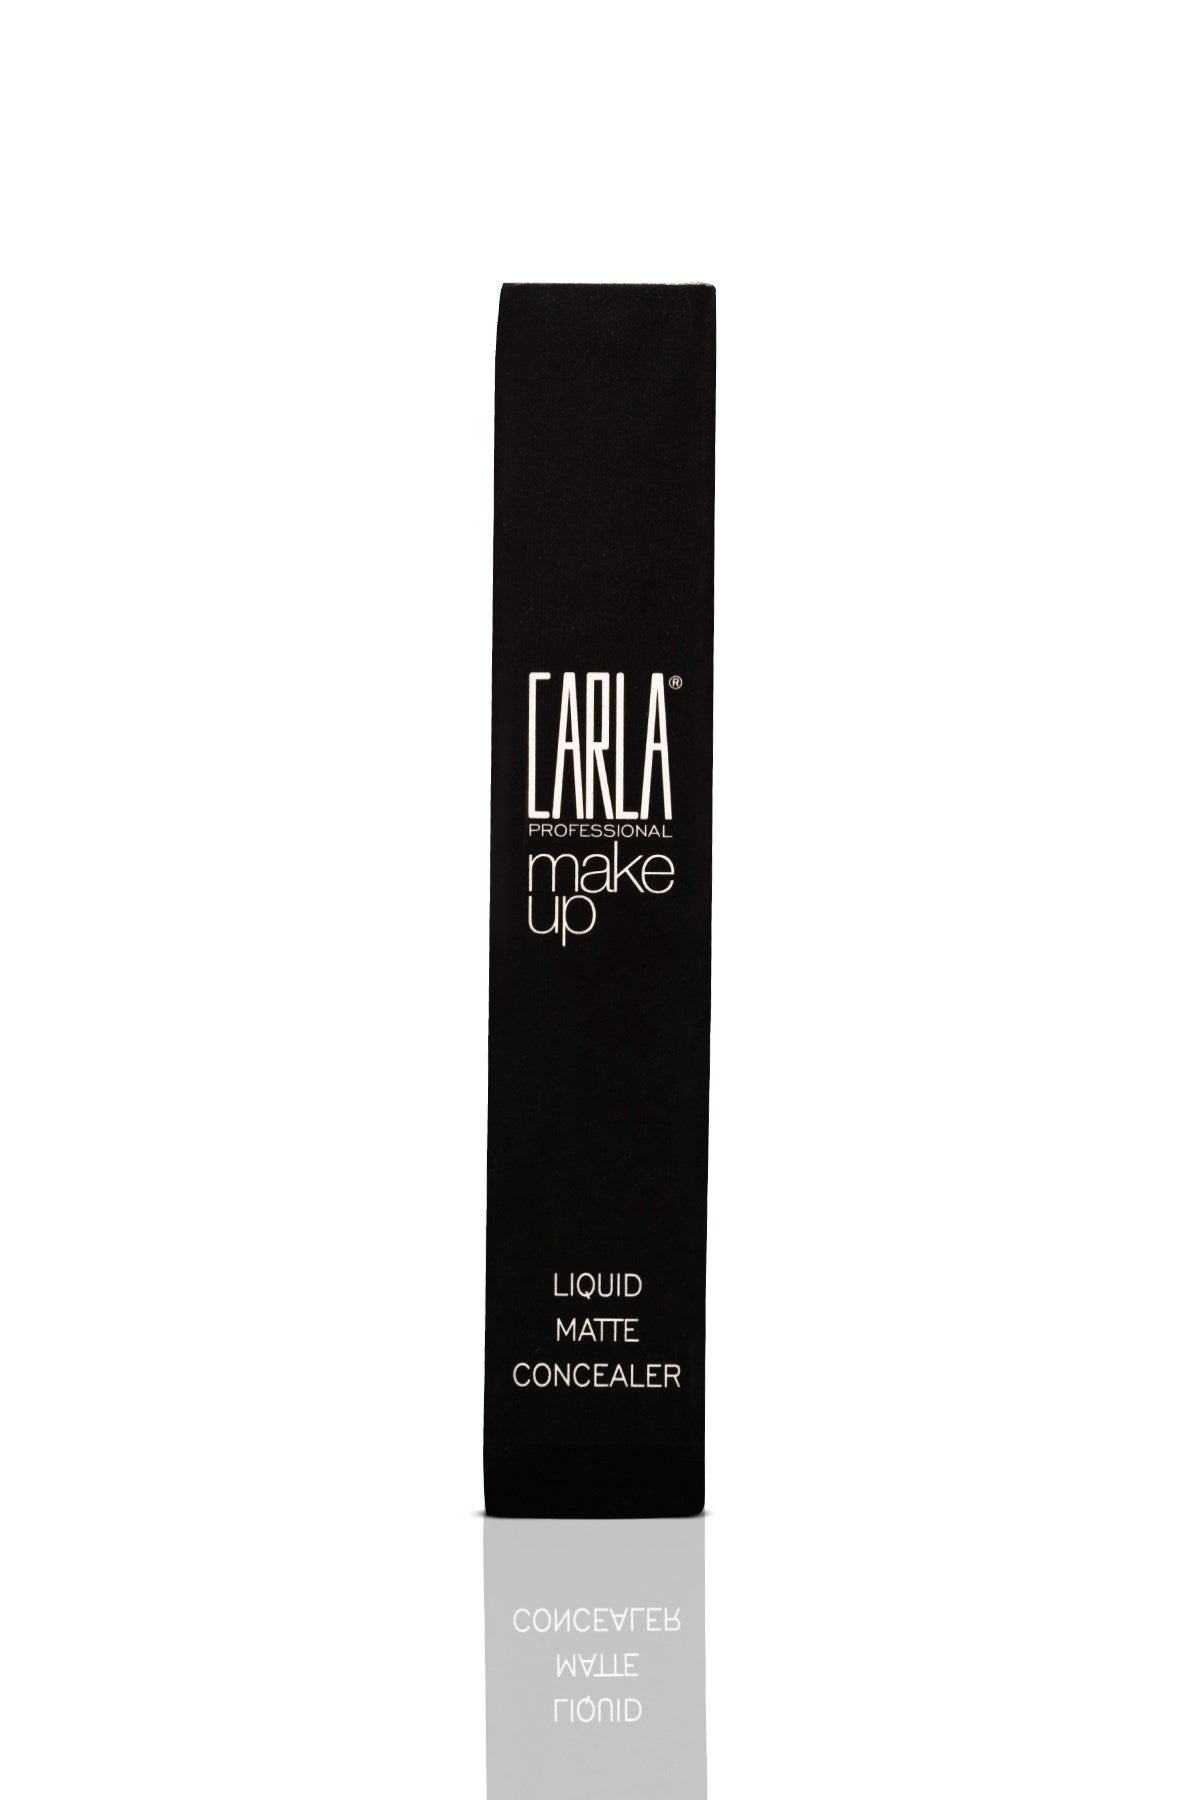 Carla Liquid Matte Concealer - Shade: Medium 402 - Flawless Coverage for a Perfect Look